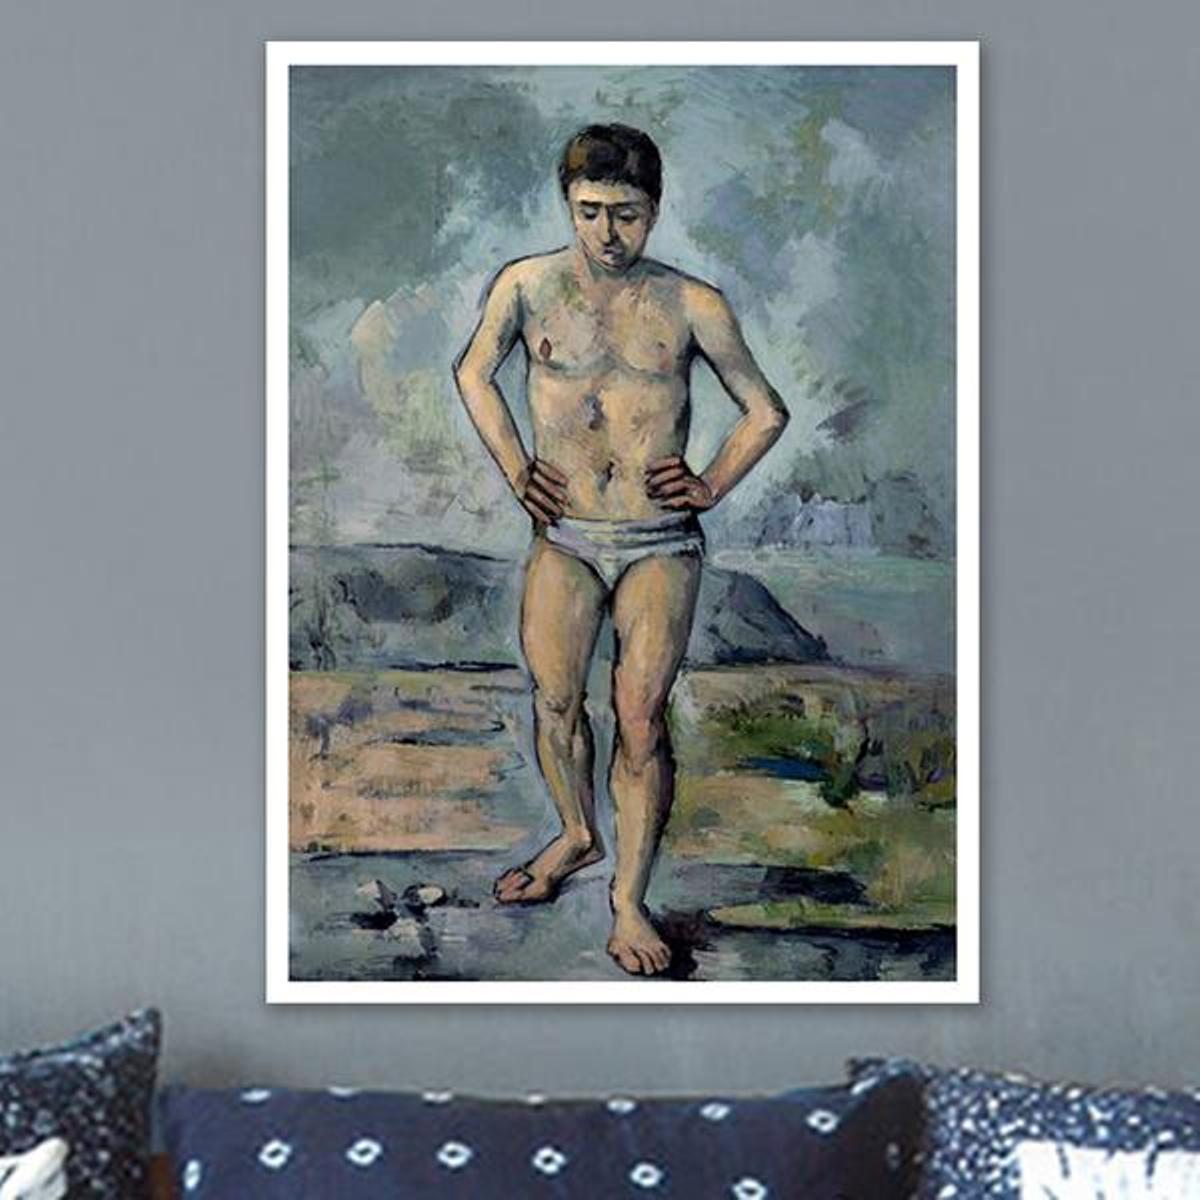 The Bather by Paul Cezanne - Van-Go Paint-By-Number Kit